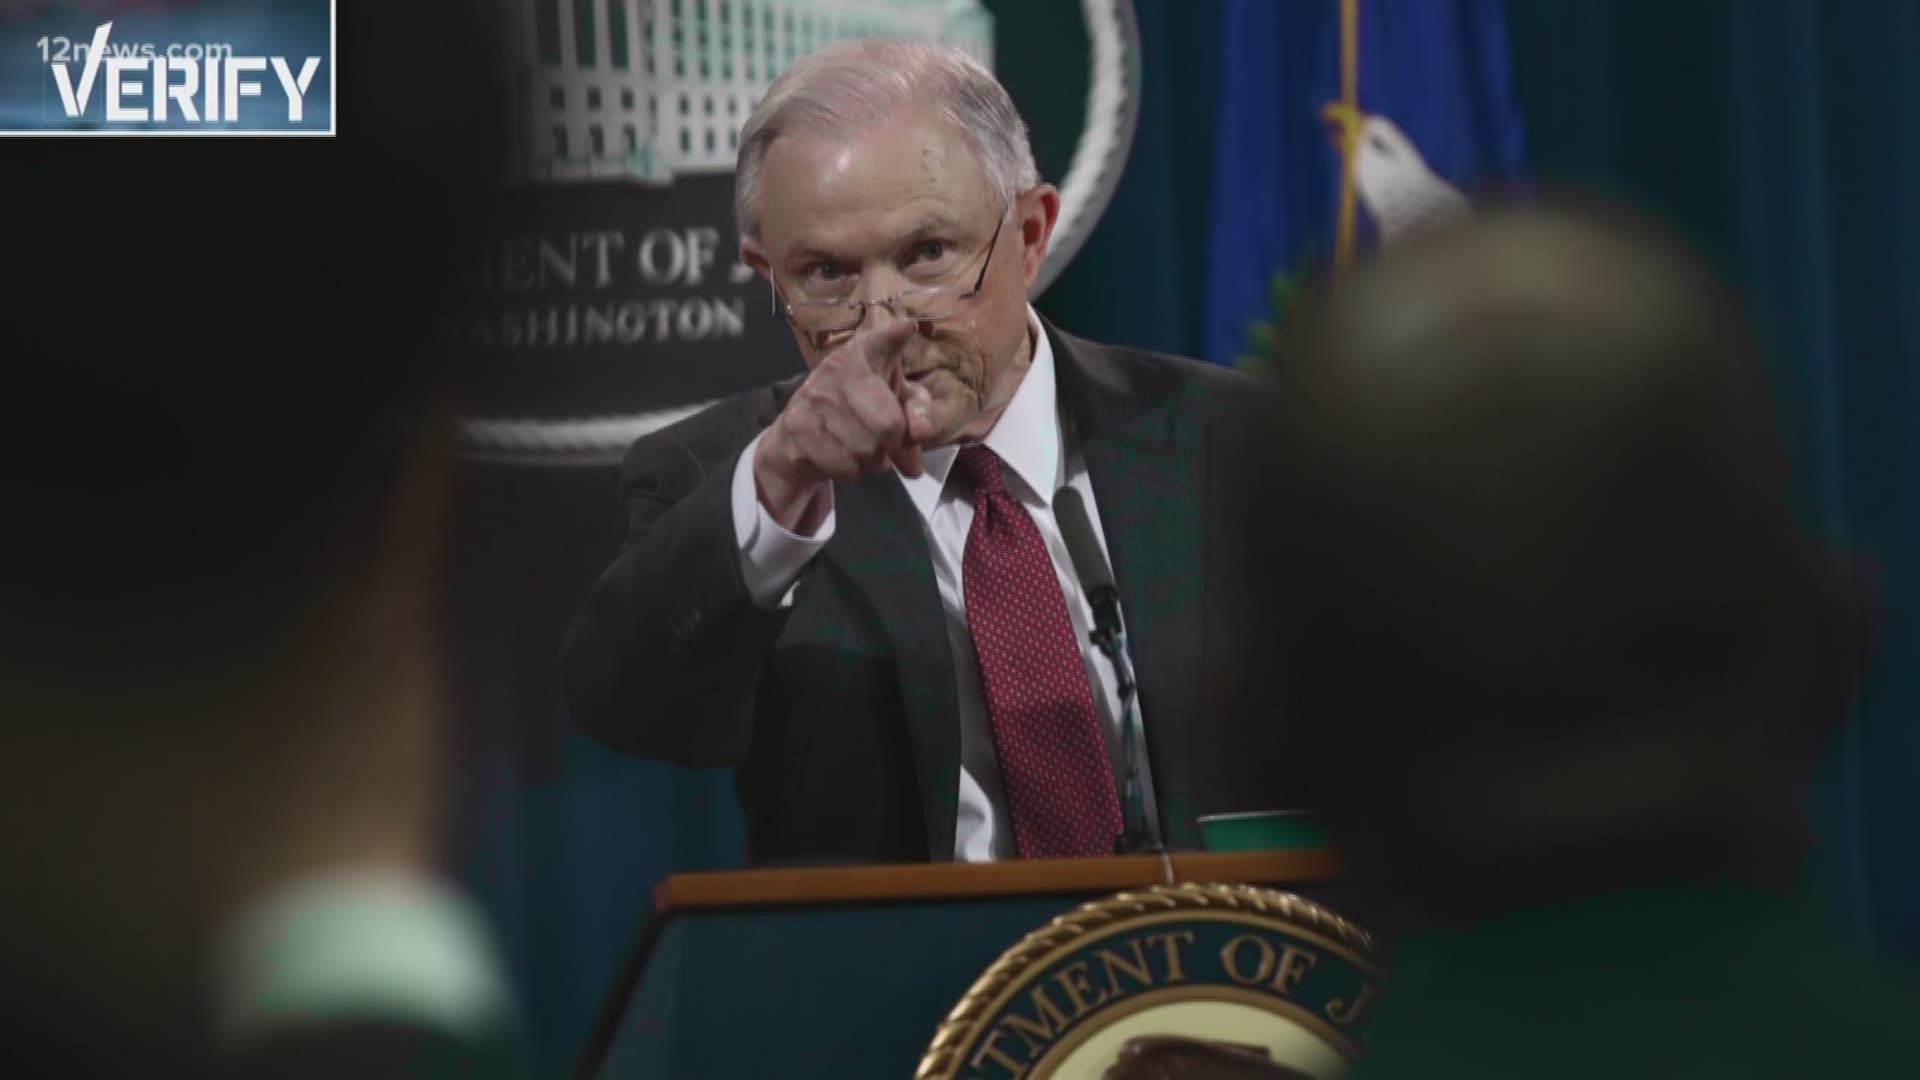 It's unknown if Attorney General Jeff Sessions can crackdown on legal medical marijuana.